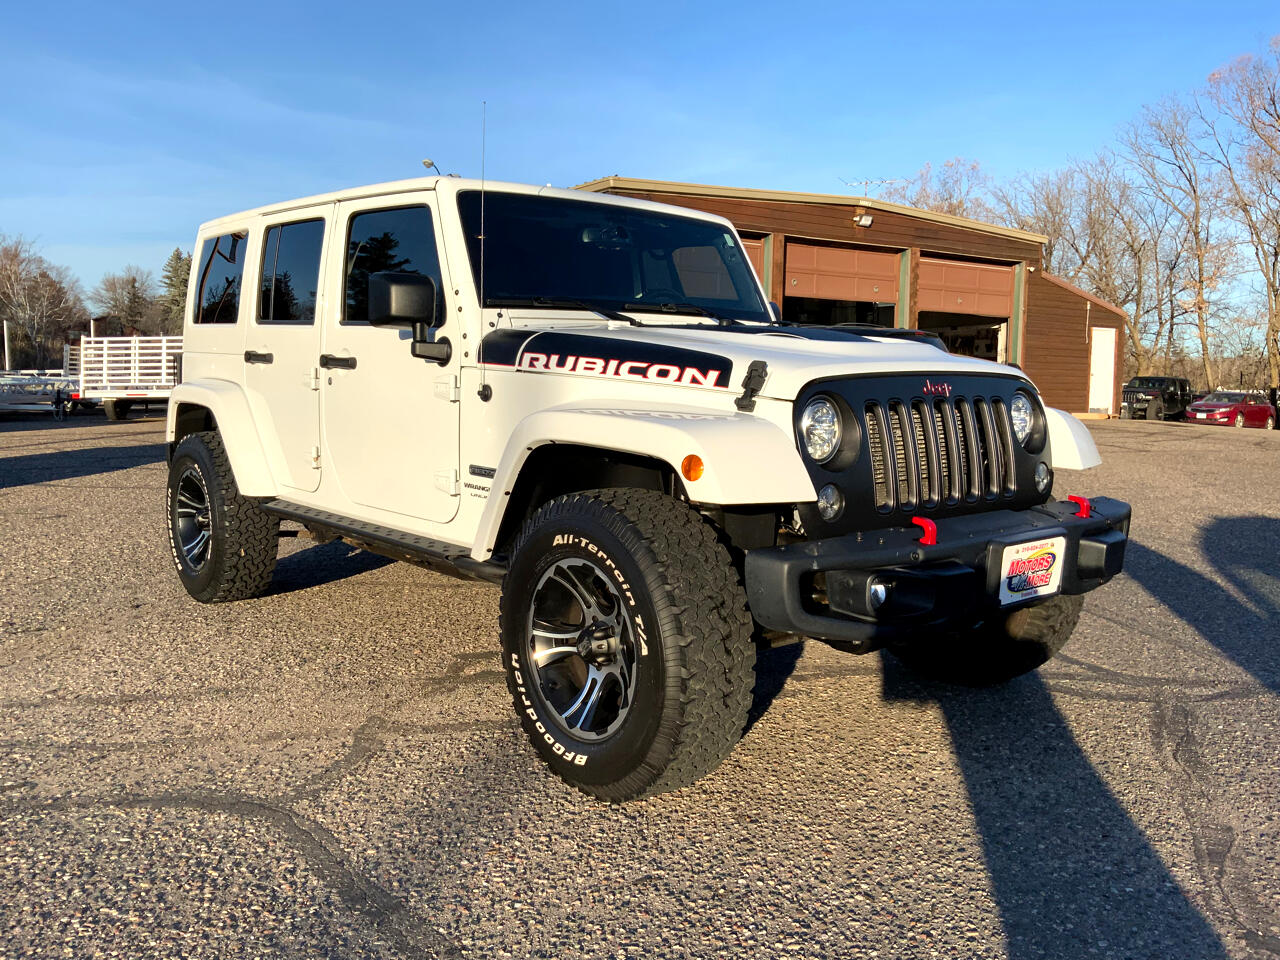 Used 2018 Jeep Wrangler JK Unlimited Rubicon with VIN 1C4BJWFG5JL845939 for sale in Brainerd, Minnesota